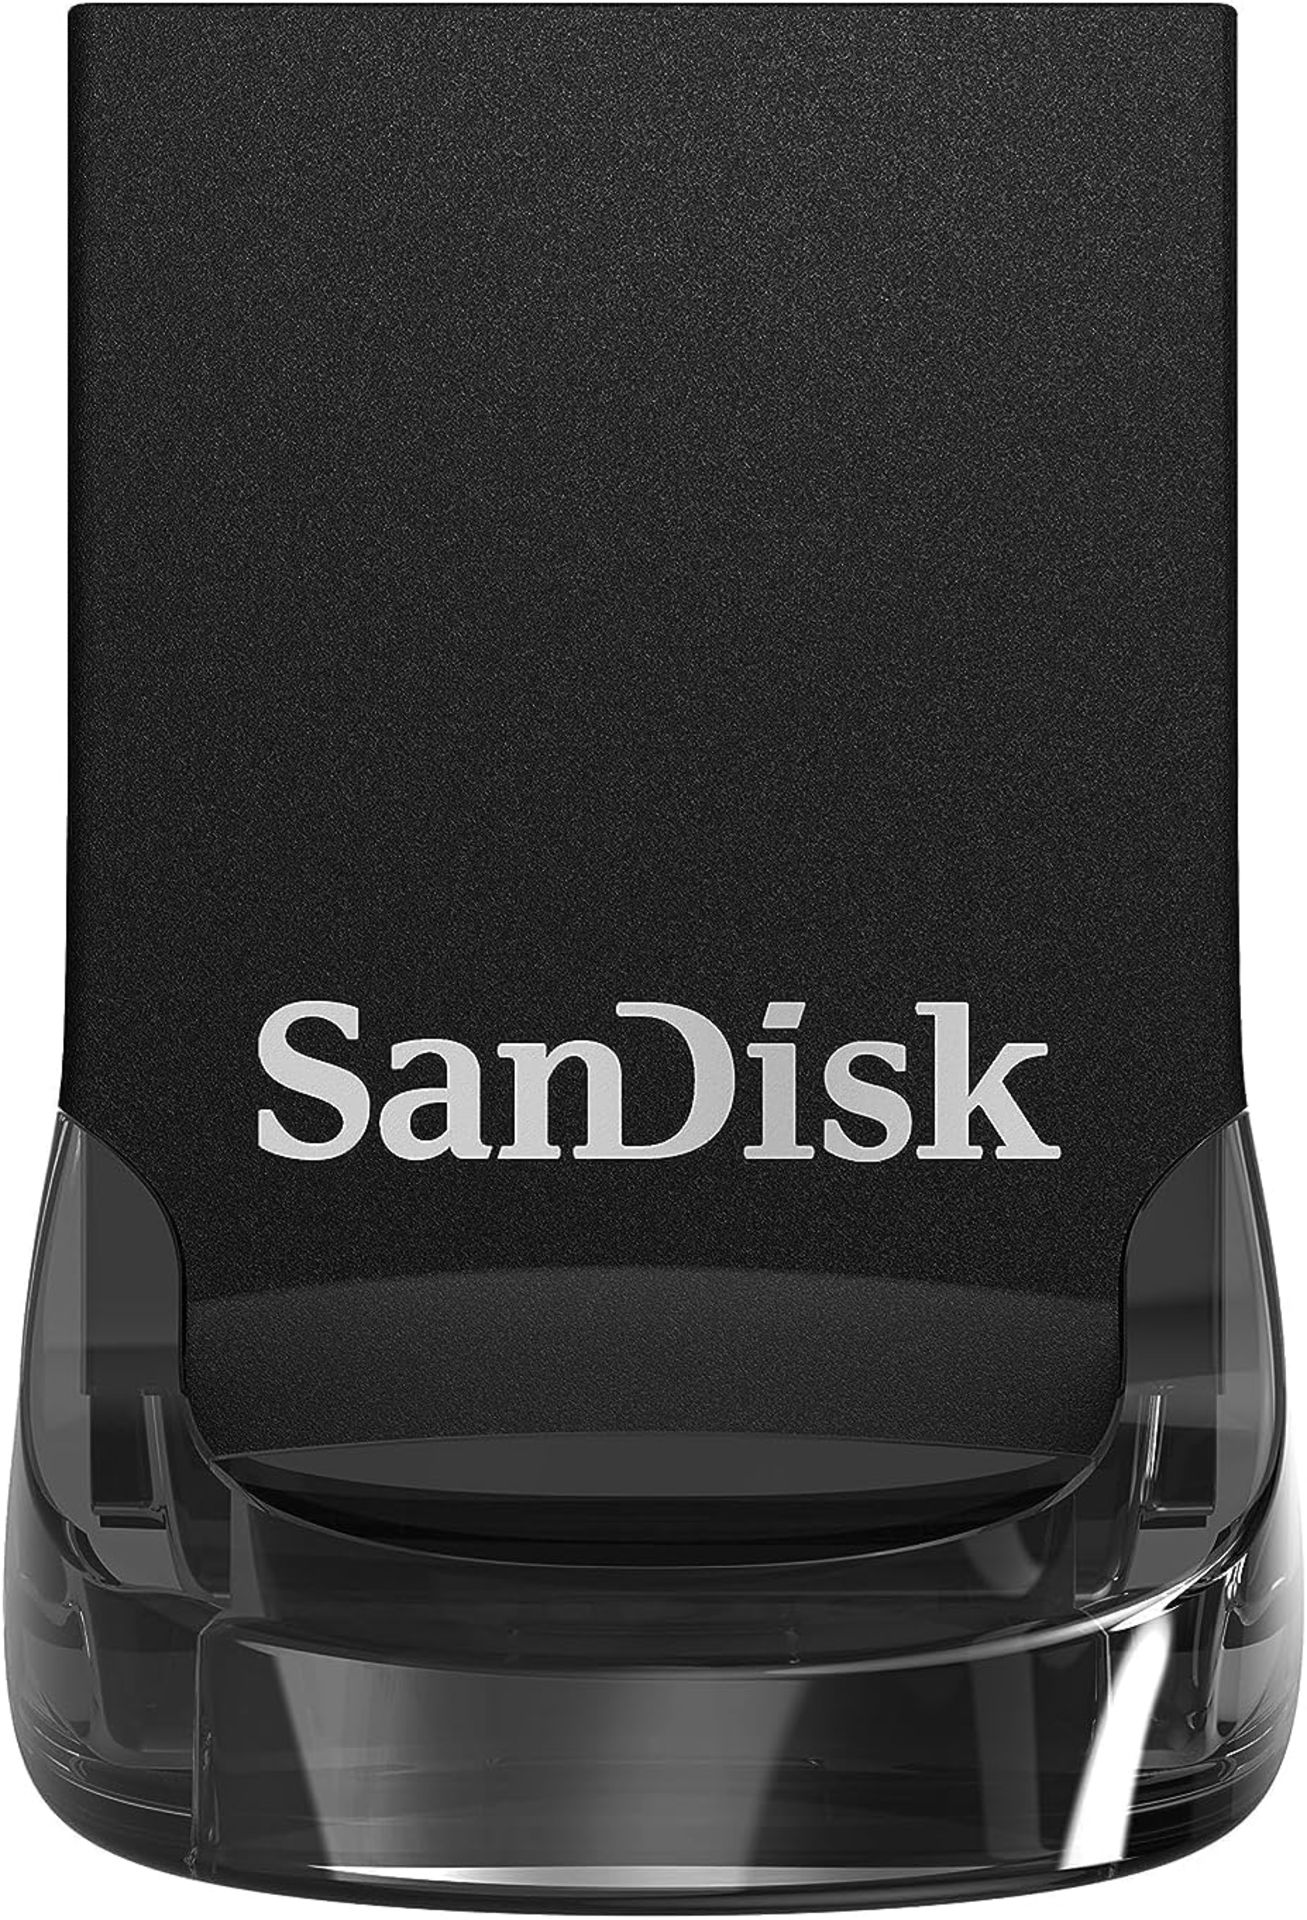 2x NEW FACTORY SEALED SANDISK Ultra Fit USB 3.2 Gen 1 256GB. RRP £51.99 EACH. Compact plug-and-